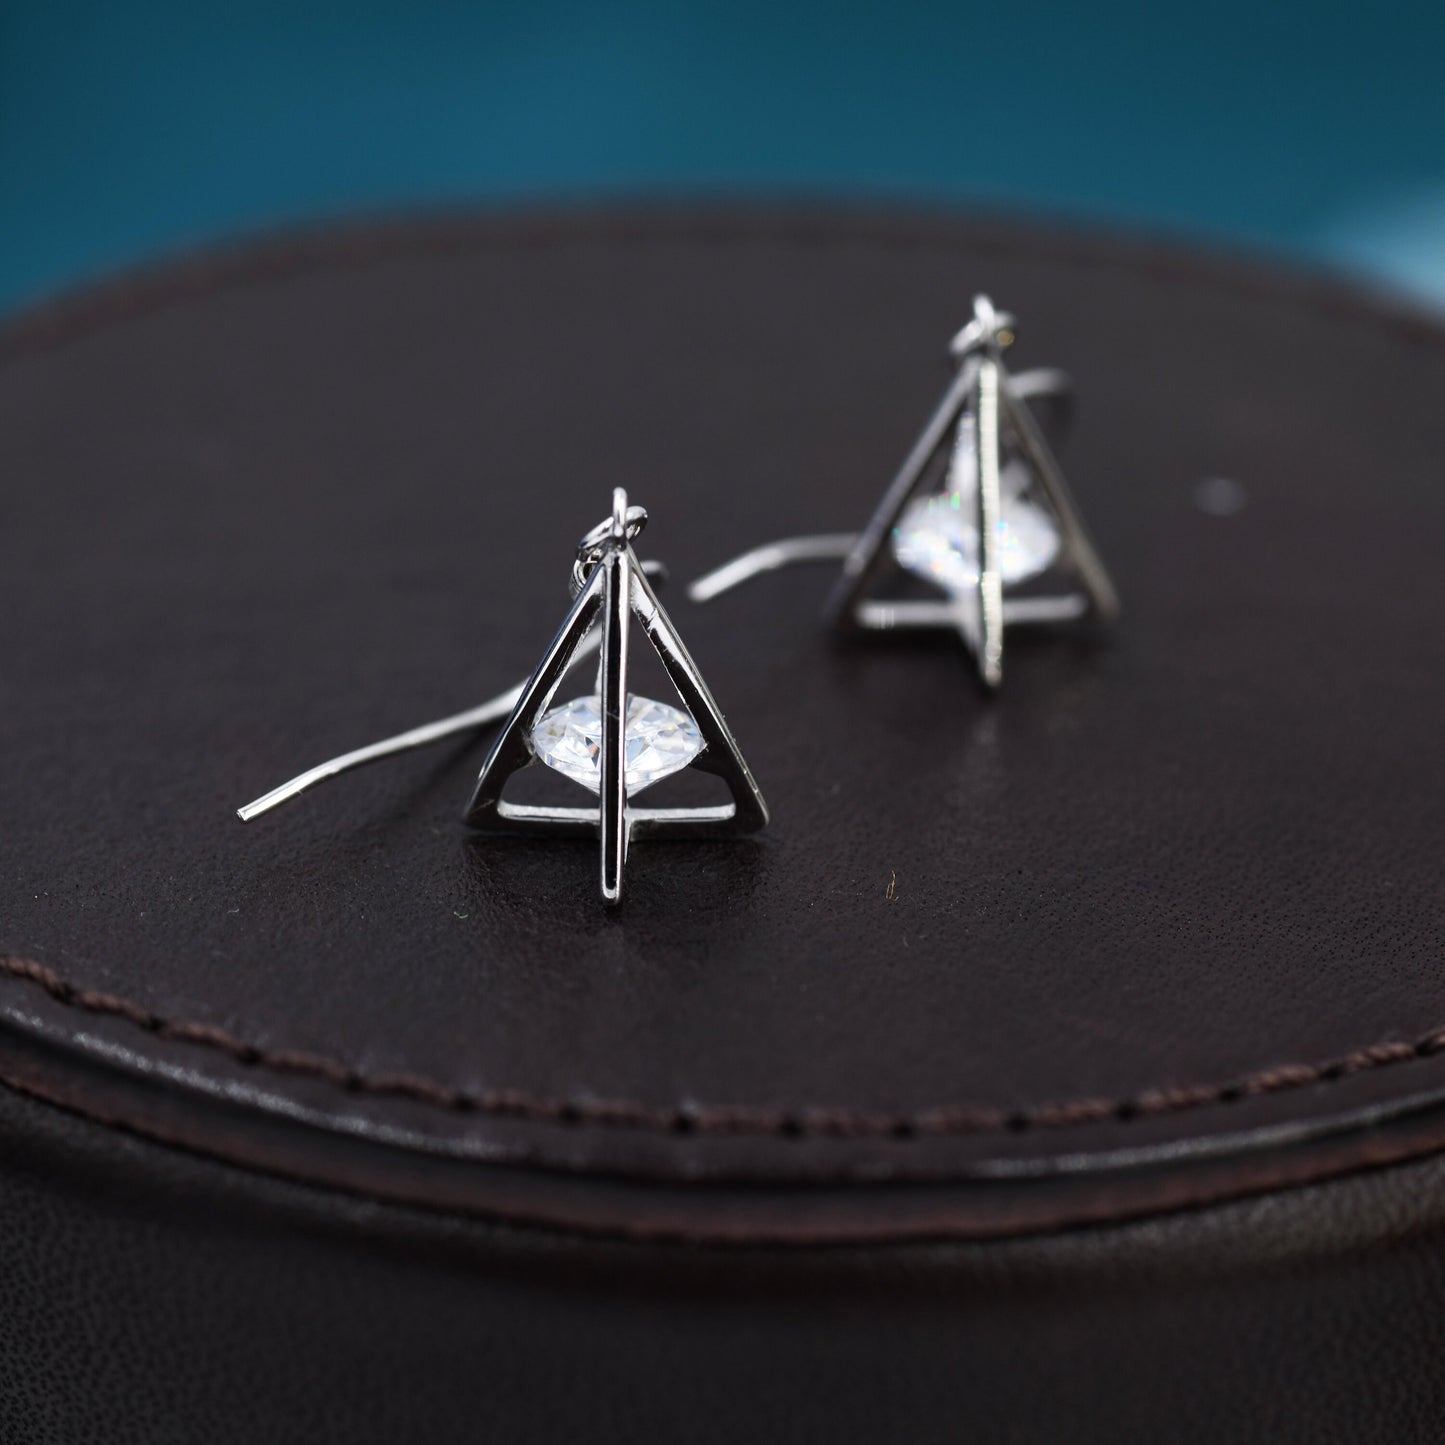 Sterling Silver Caged Crystal Diamond Pyramid Drop Hook Earrings, Gold Coated Sterling Silver, Modern Geometric Jewellery